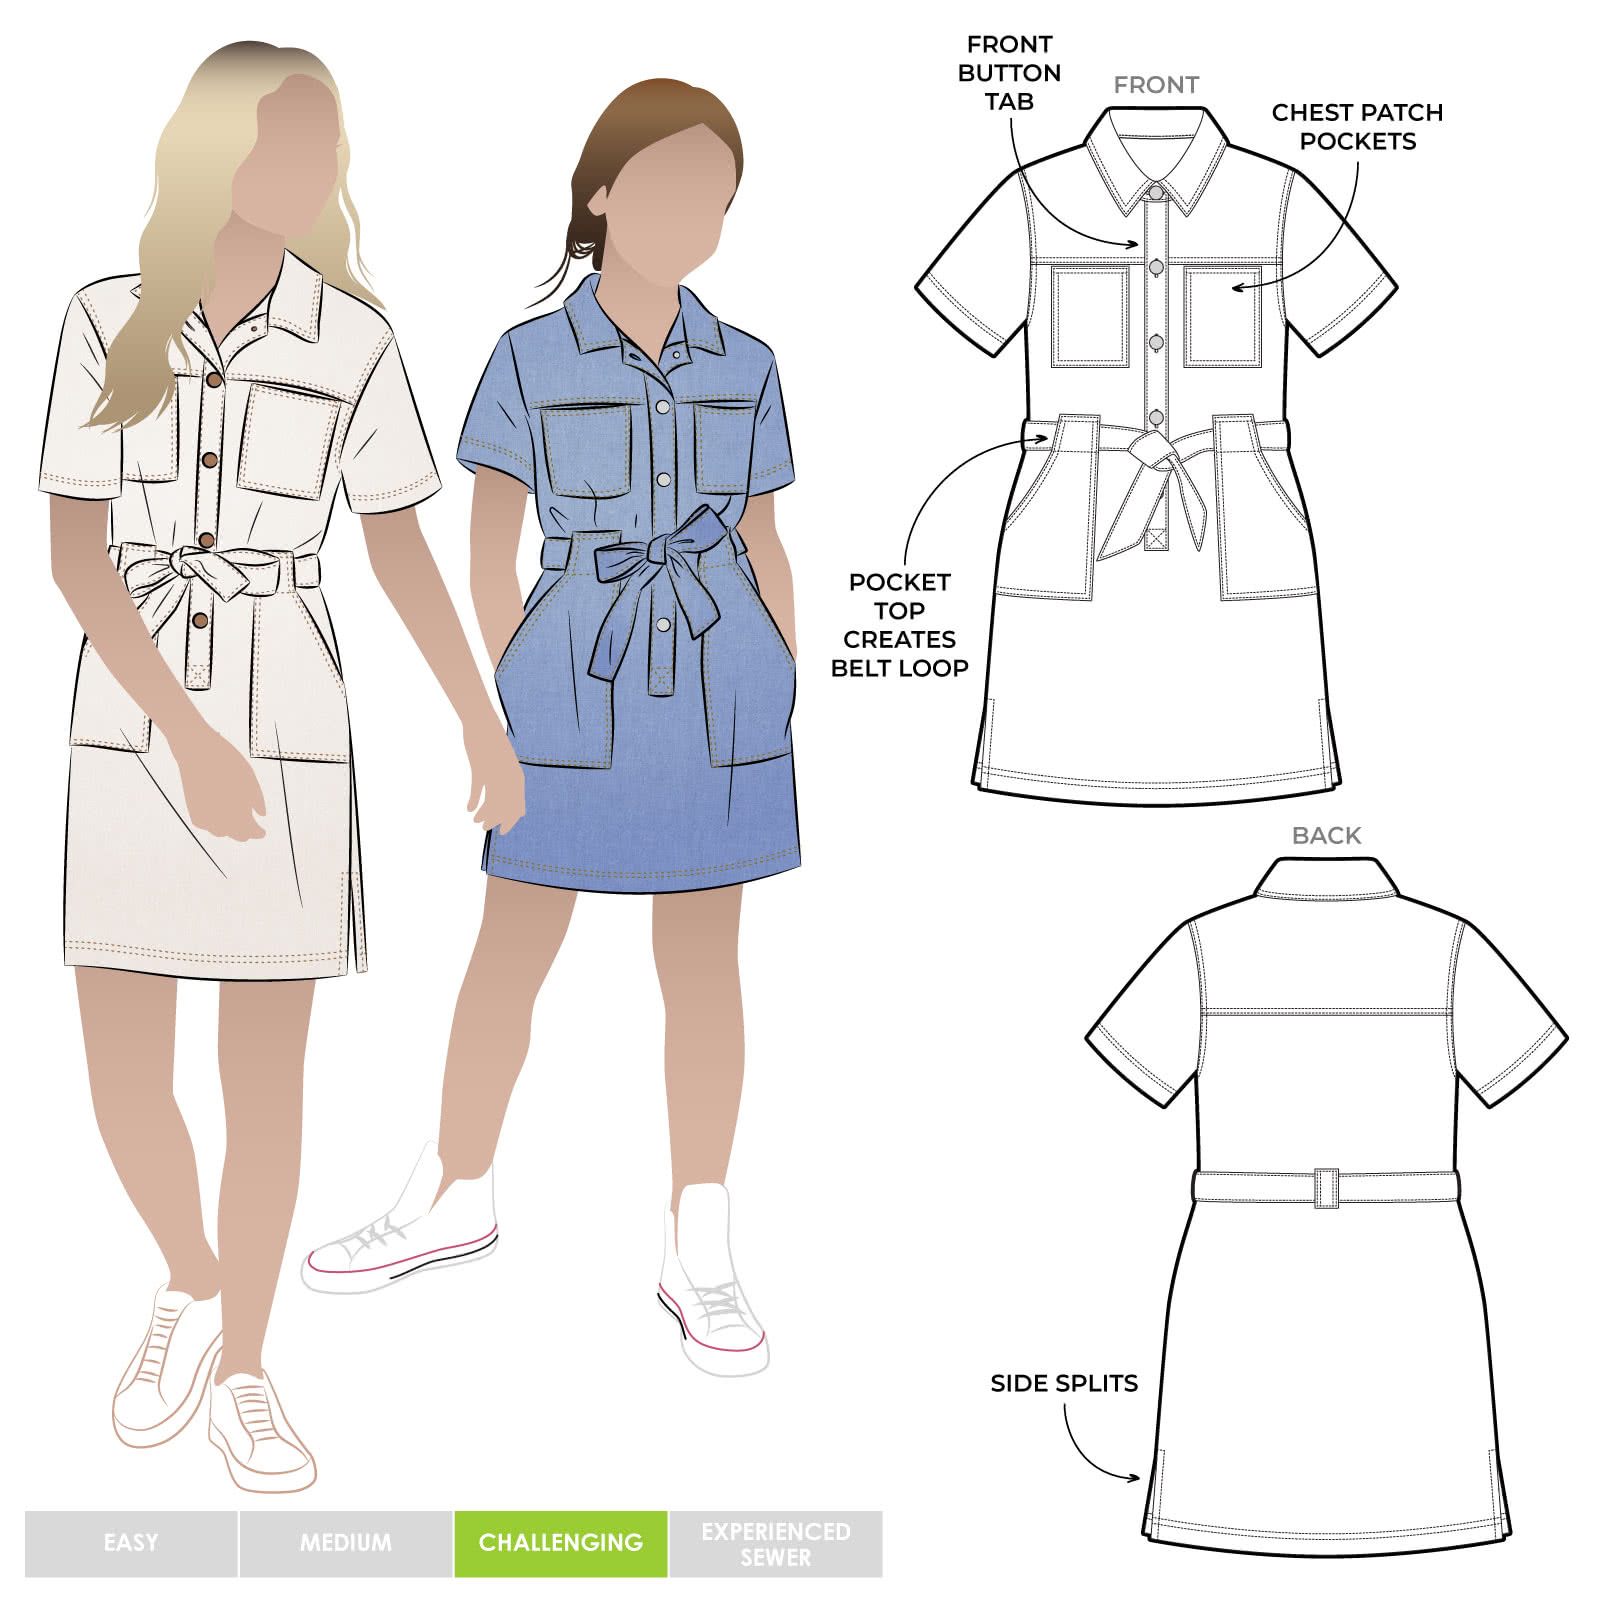 Demi Teens Dress By Style Arc - Panelled dress with front pockets, waistband tie and front button tab opening - a pattern for teens 8-16